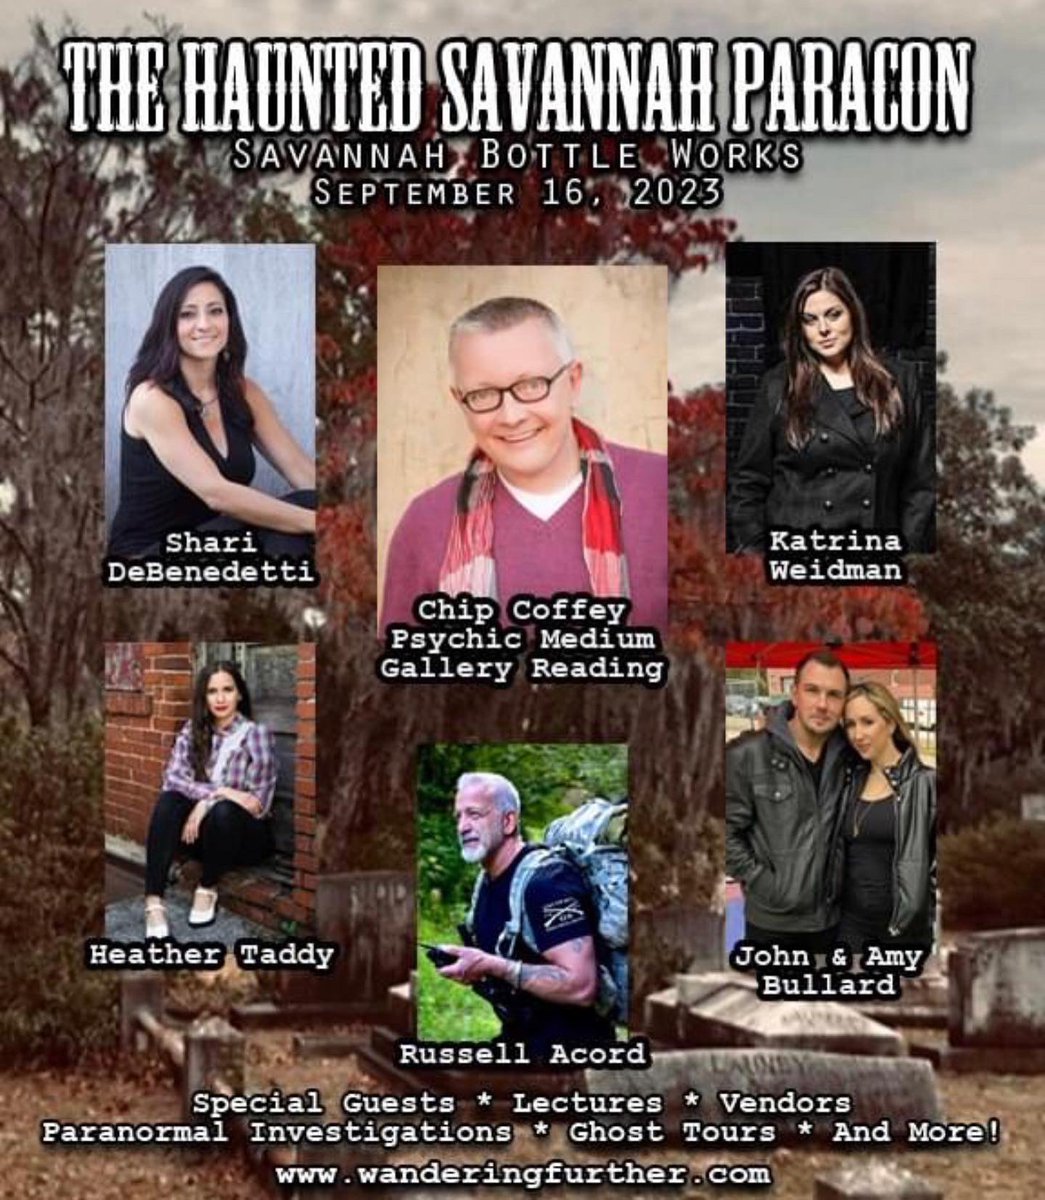 Coming up this weekend in Savannah, Georgia, I’ll be at the The Haunted Savannah Paracon with @KatrinaWeidman, @ClassicTad, and @chipcoffey. For all tickets and information go to the website….#paranormal #events #haunted #GhostHunters @ghosthunters